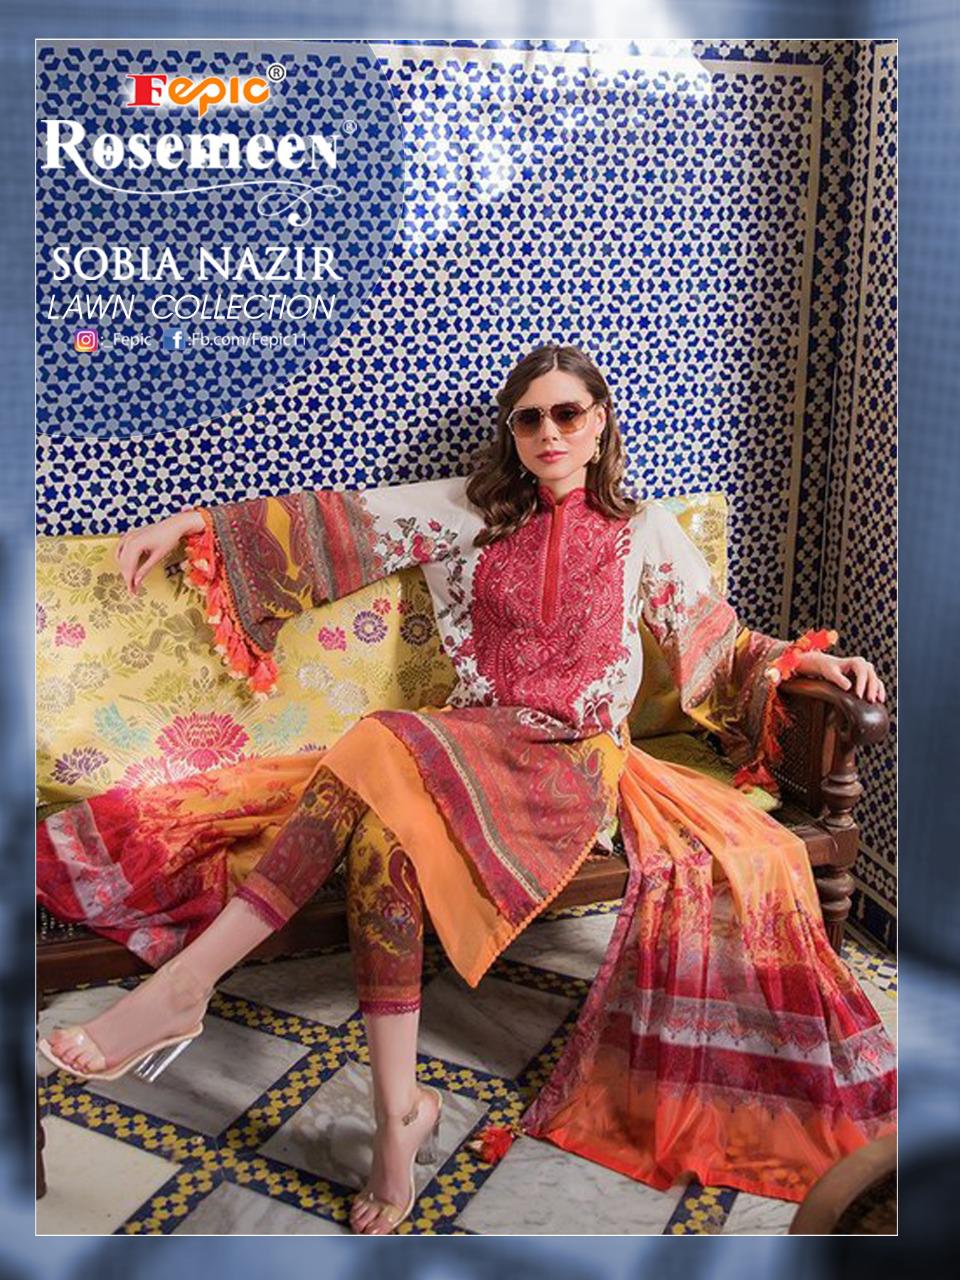 Fepic Rosemeen Sobia Nazir Lawn Collection Digital Printed P...